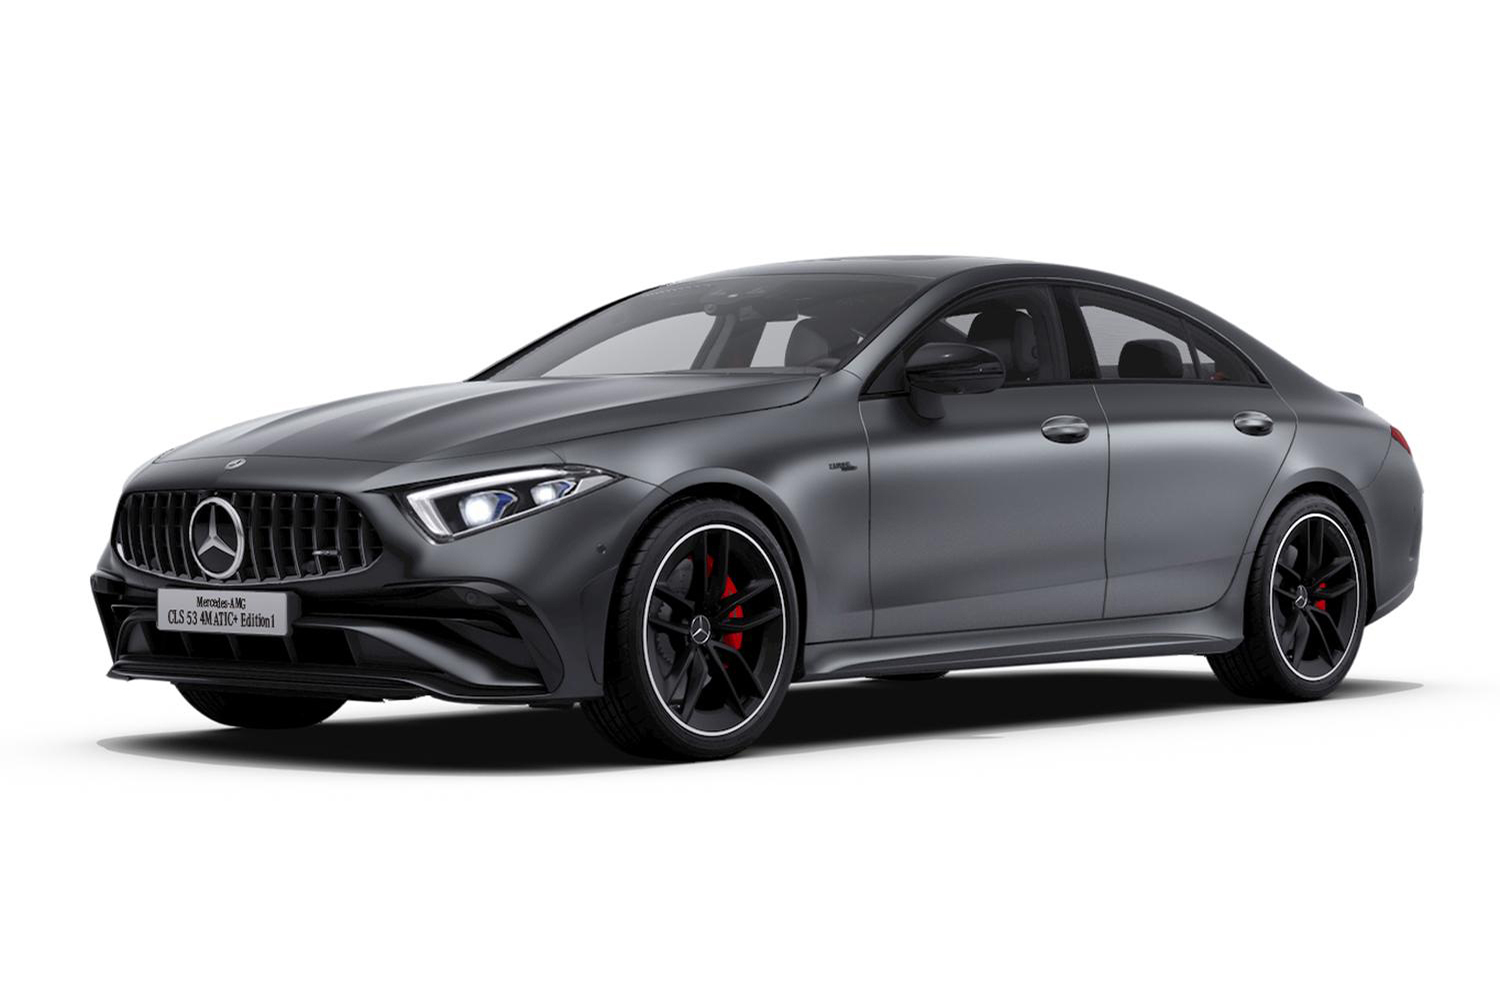 Front styling of Mercedes AMG CLS 53 4MATIC + Edition